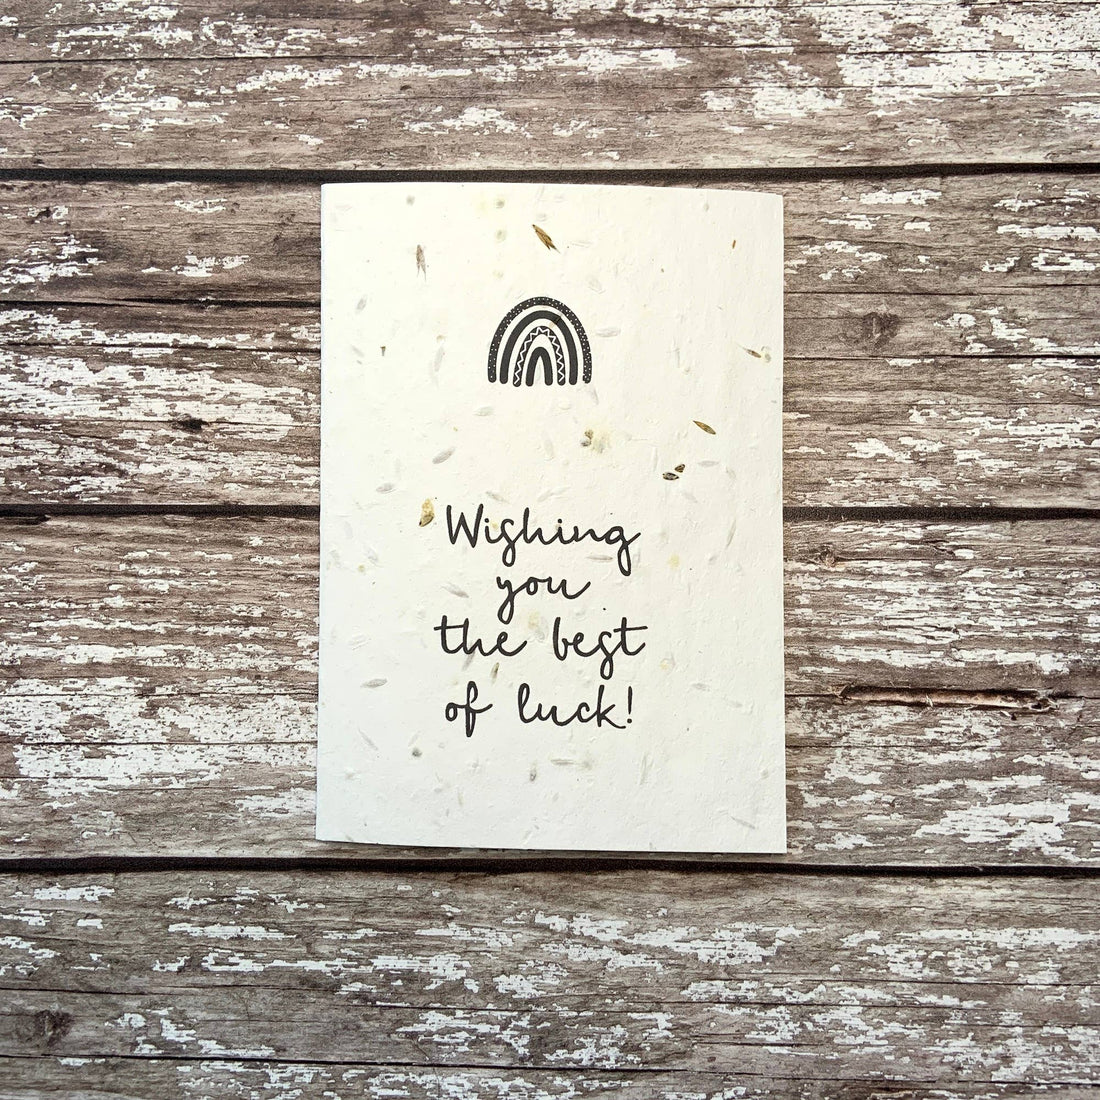 Best Of Luck Rainbow Plantable Seed Card Cards Audrey & Coco